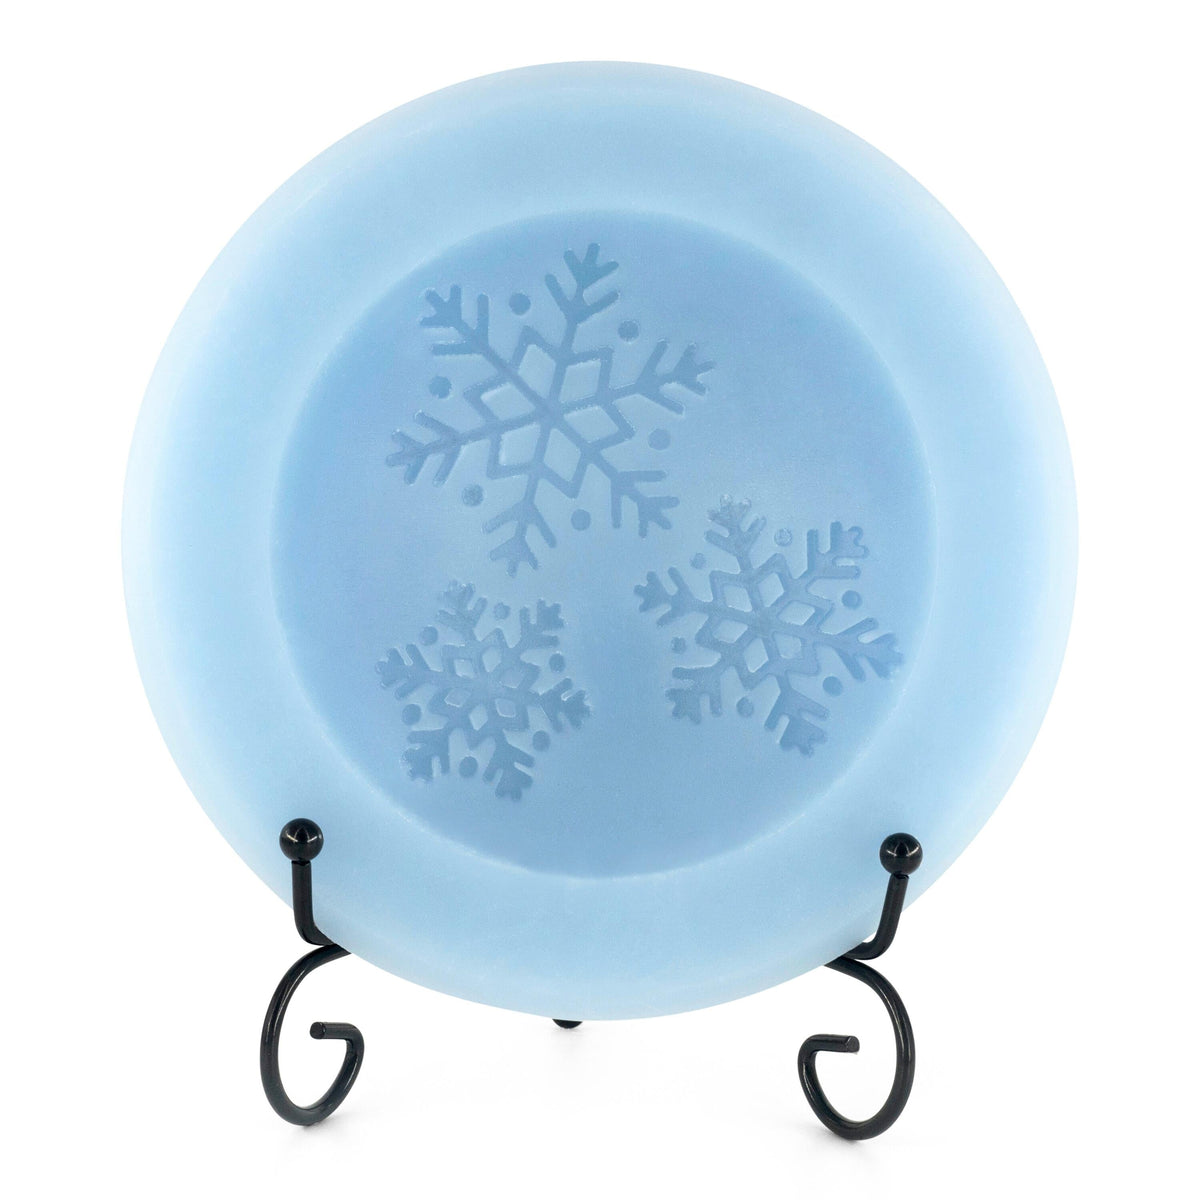 Snow Day 7" Scented Vessel w/ Stand (Snowflakes) by Scented Vessel